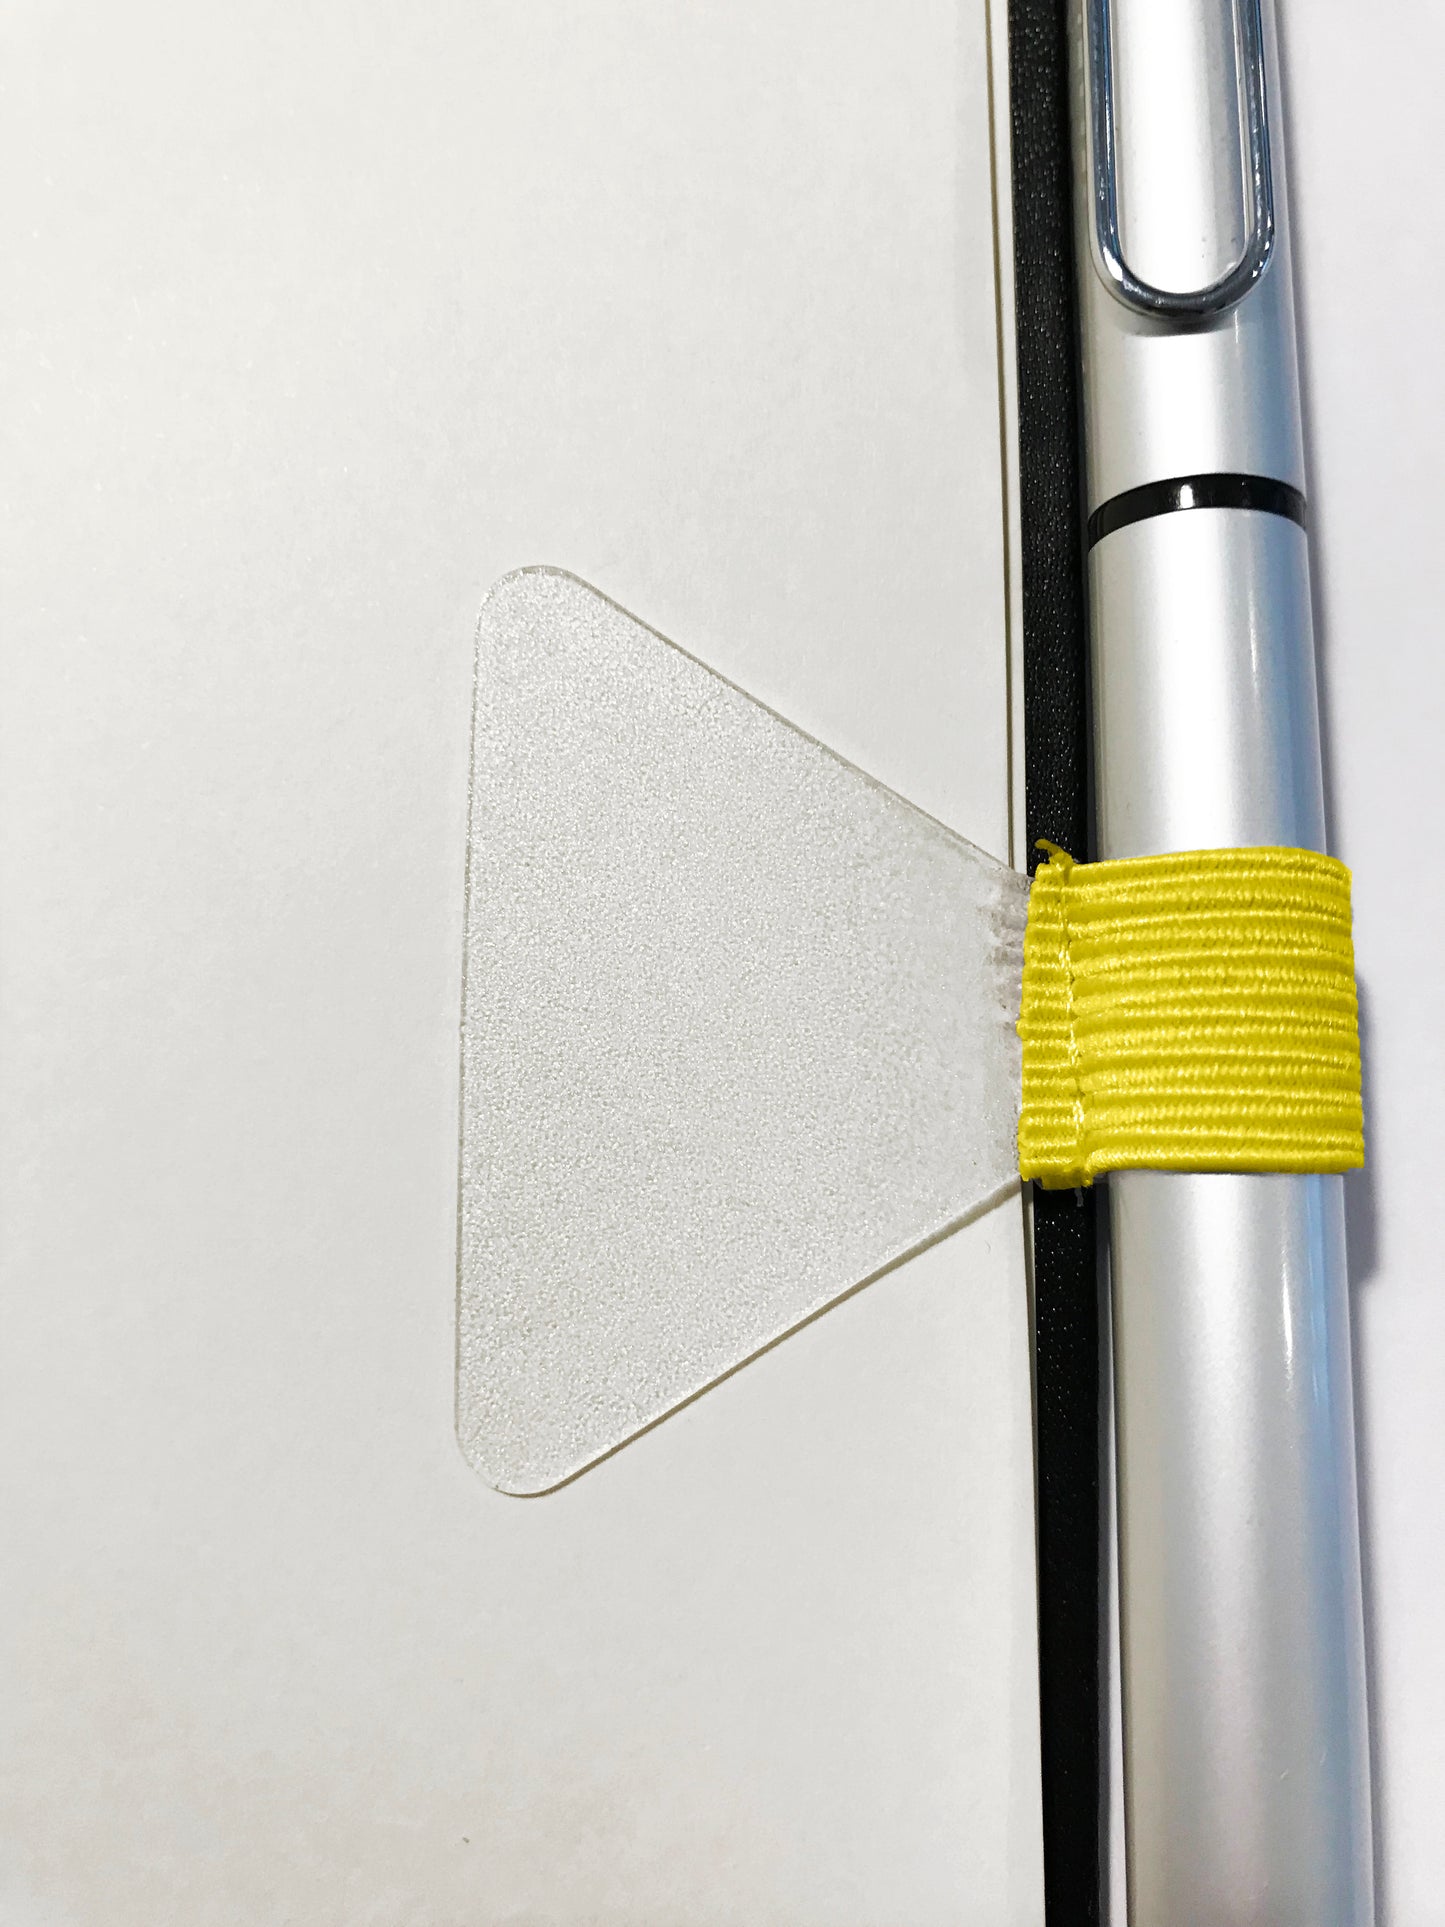 Gobrecht & Ulrich Yellow Self-adhesive Pen Loop in use - attached to notebook